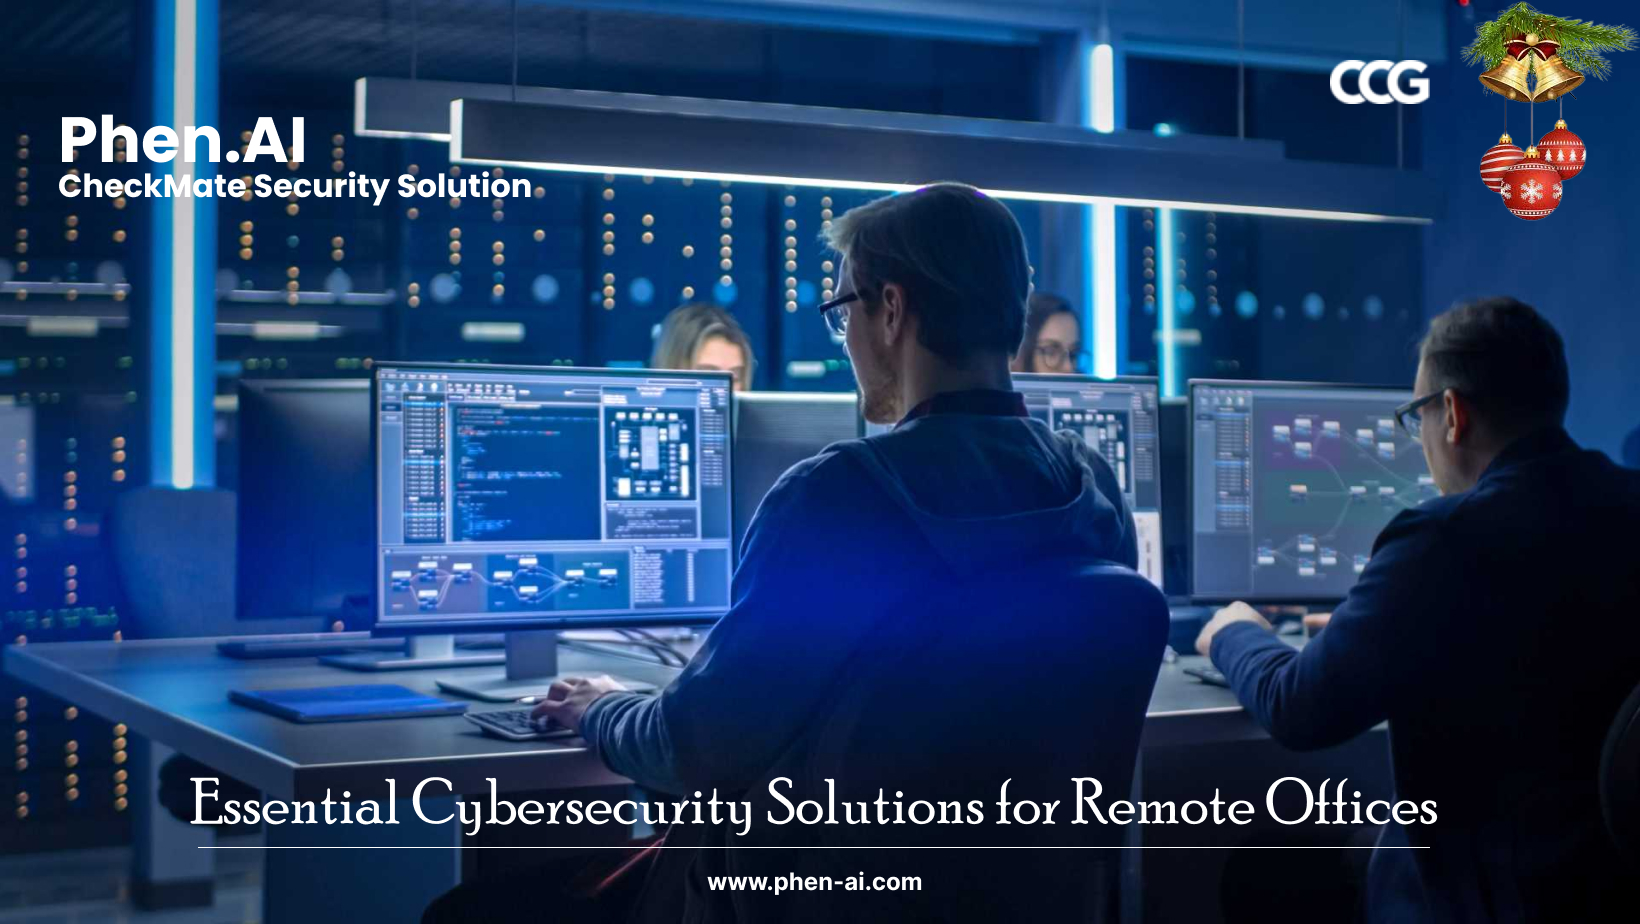 Essential Cybersecurity Solutions for Remote Offices